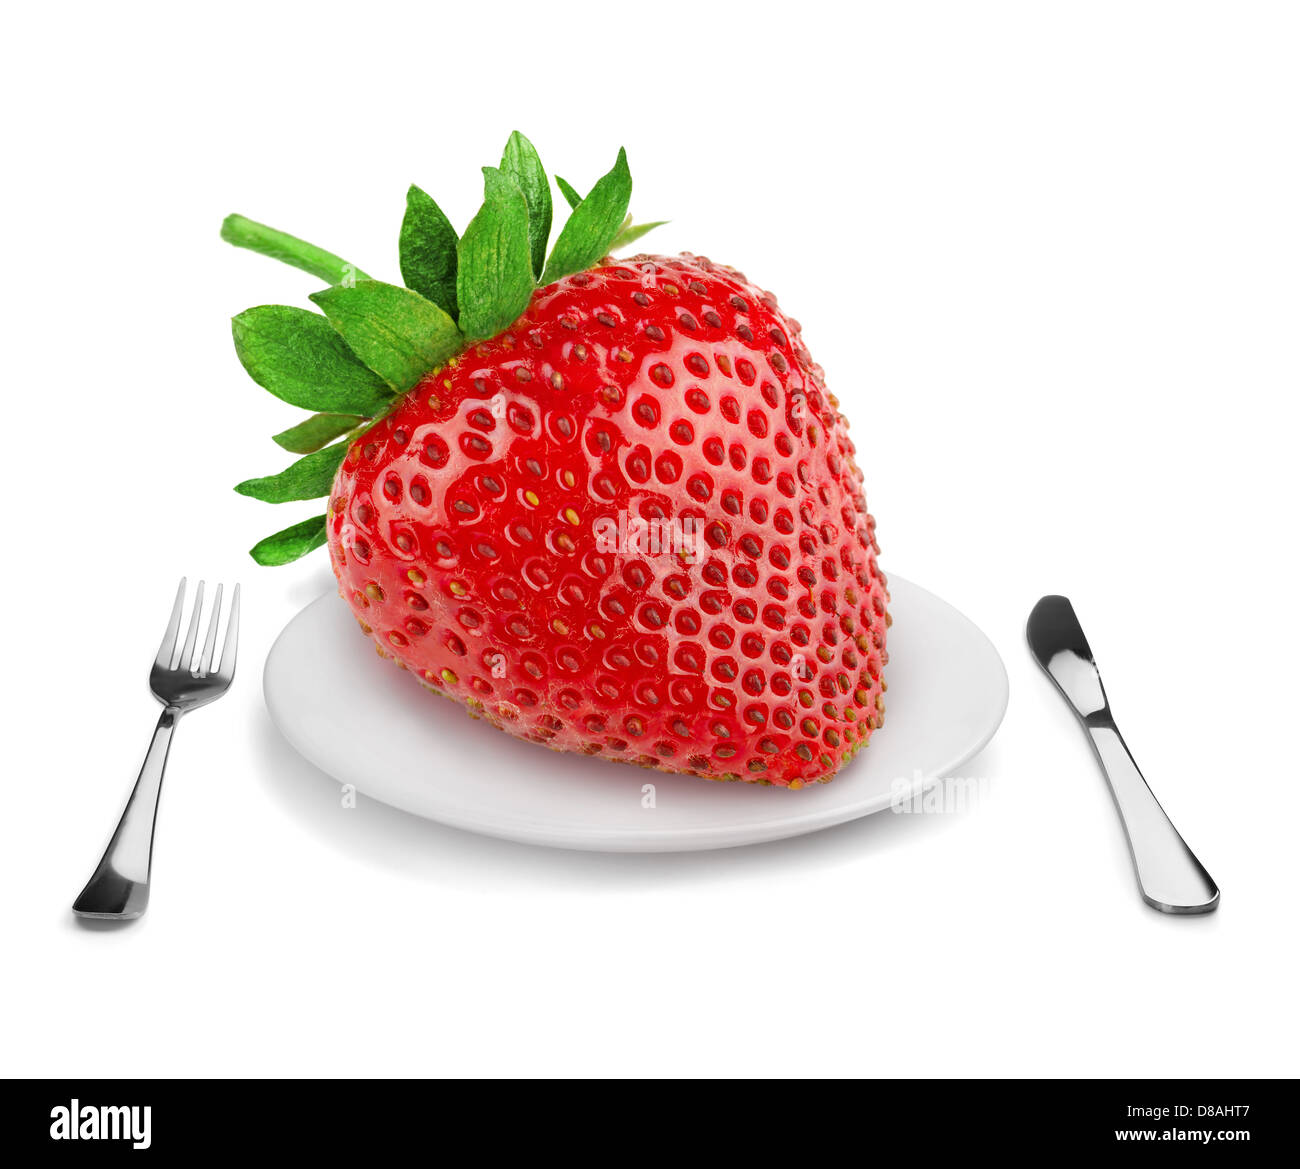 Giant strawberry on a plate - dieting concept. Isolated on white. Stock Photo